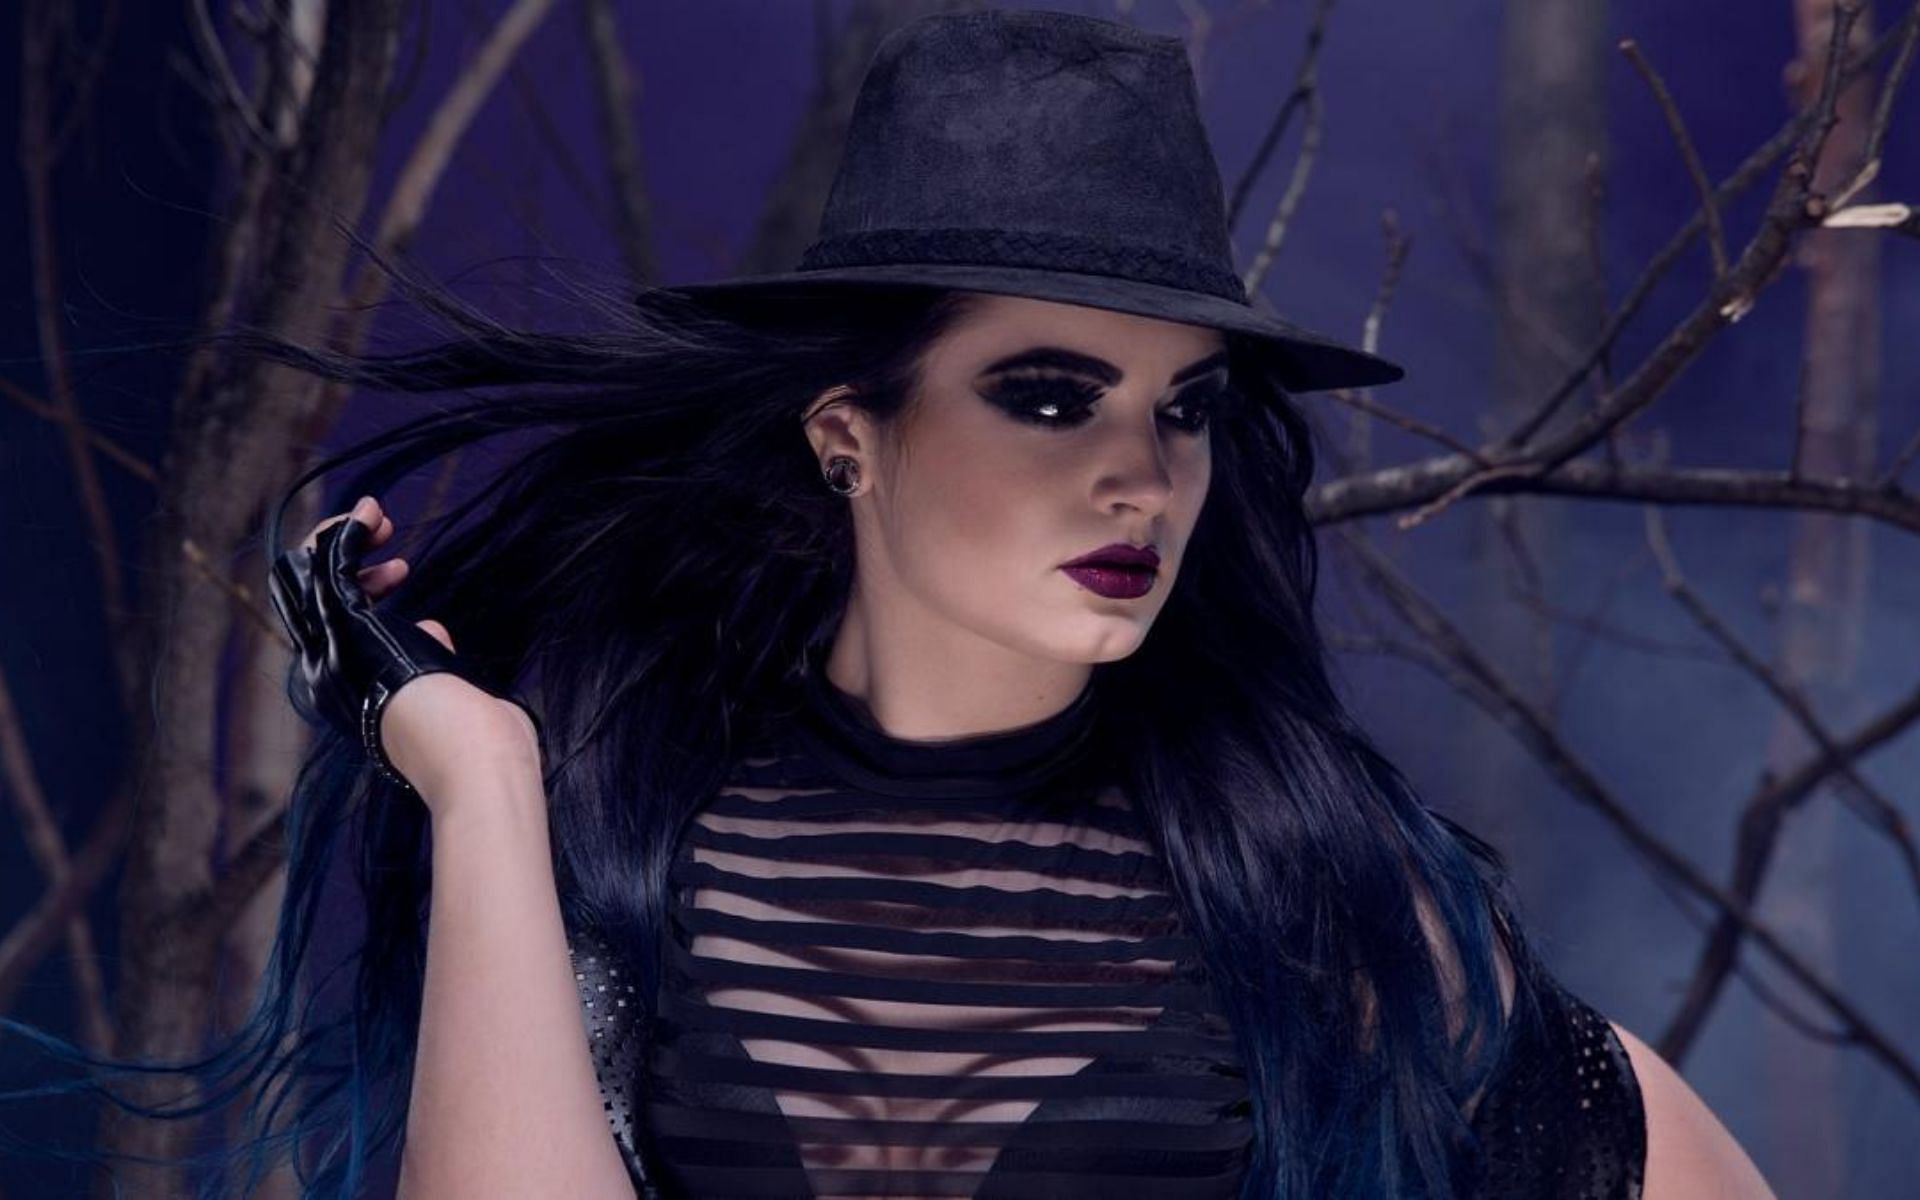 Paige had ideas about how WWE could present her on-screen